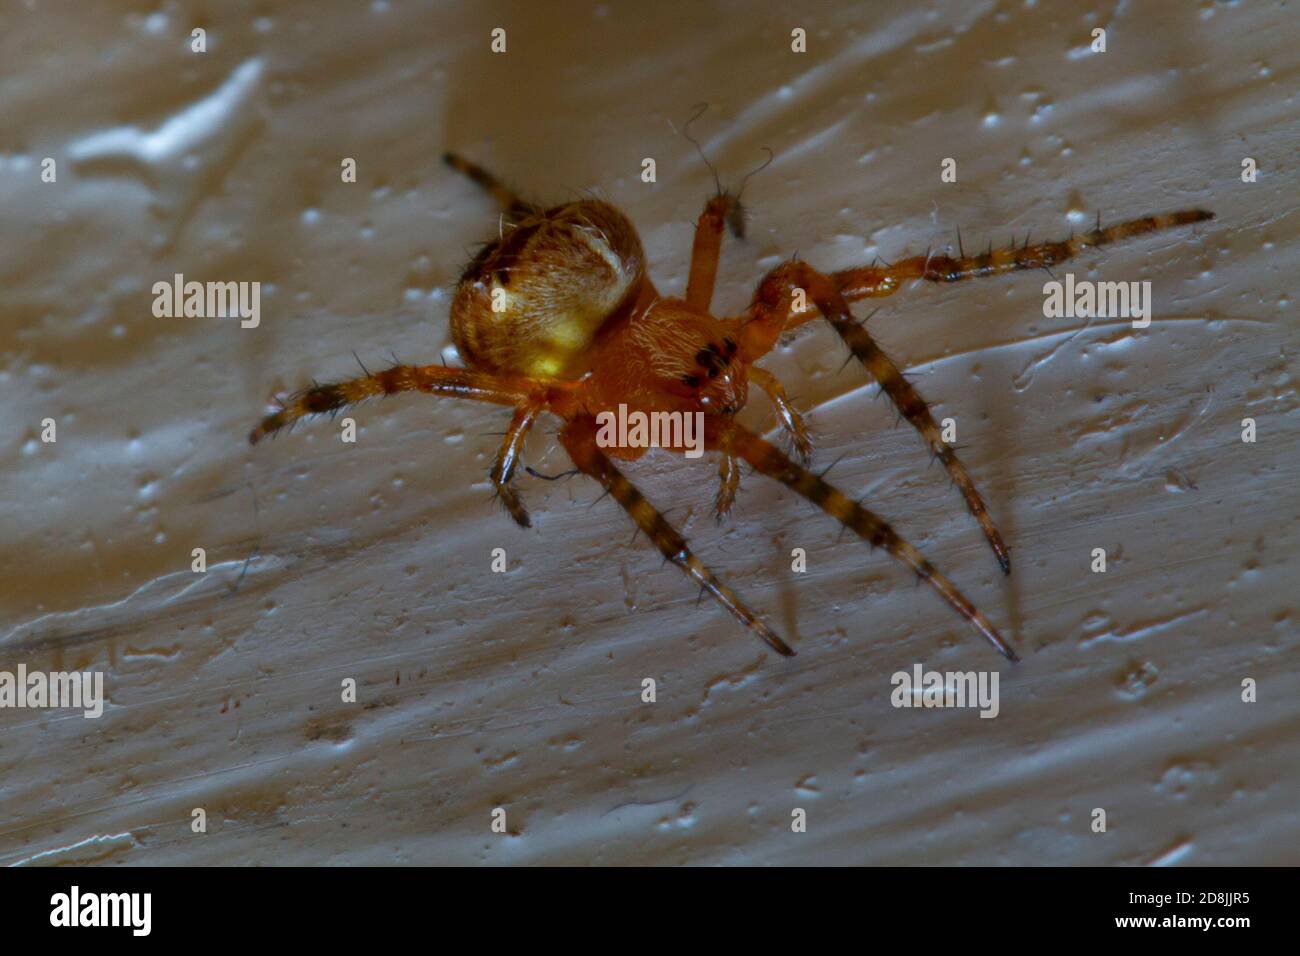 Close up image of a tangle web spider a.k.a comb footed spider. These spiders belong to Theridiidae family. This image was captured on an interior hou Stock Photo